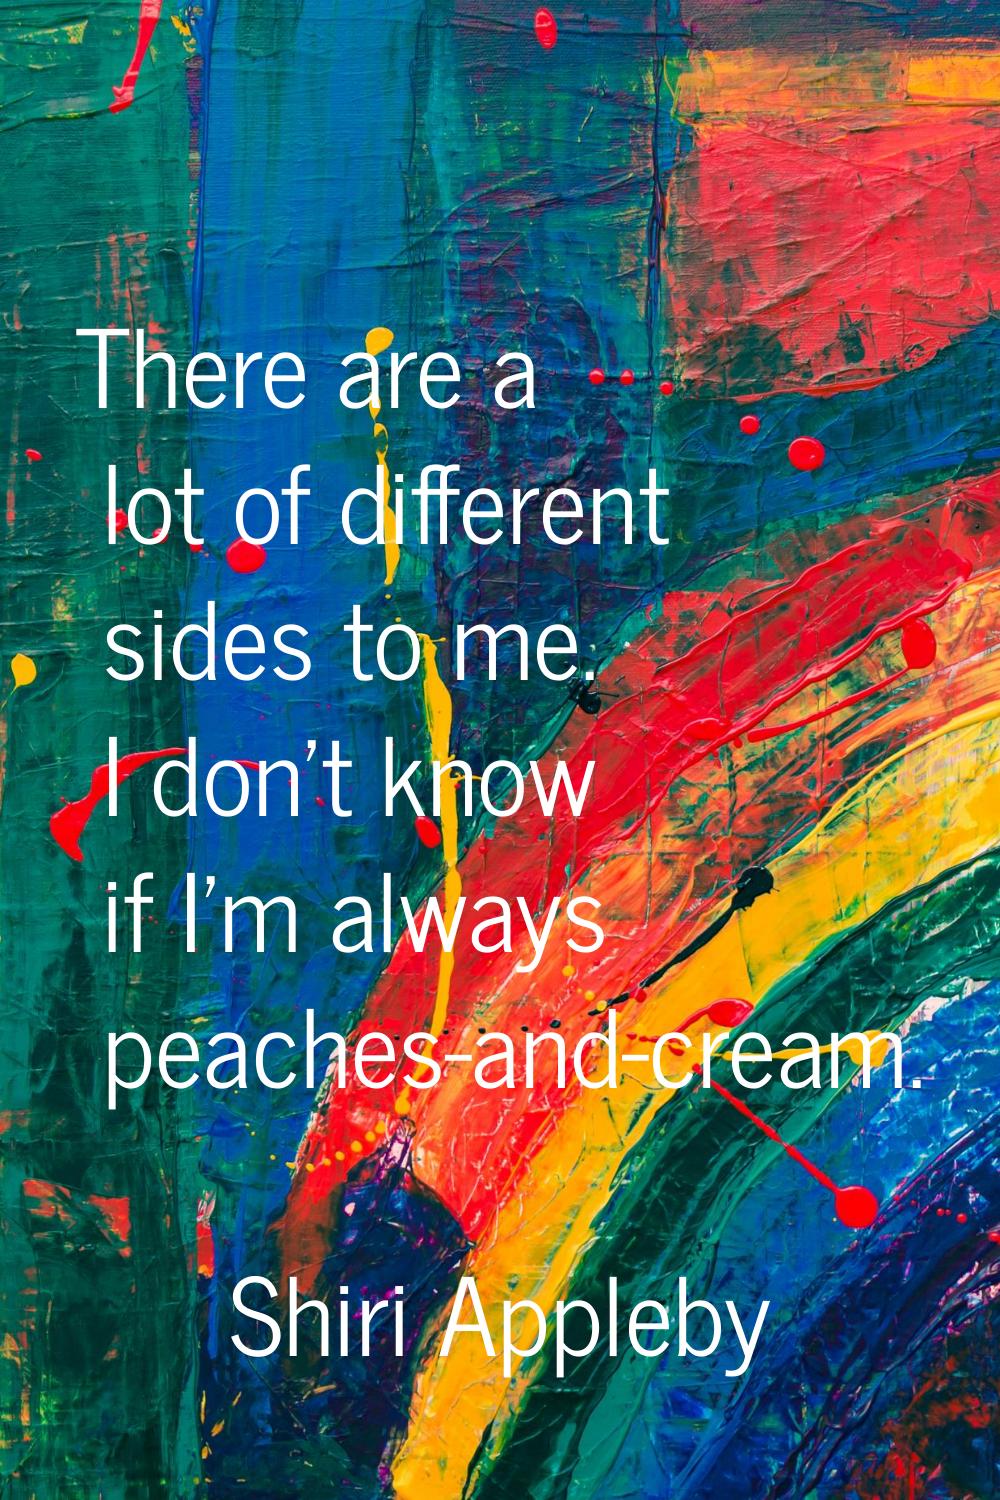 There are a lot of different sides to me. I don't know if I'm always peaches-and-cream.